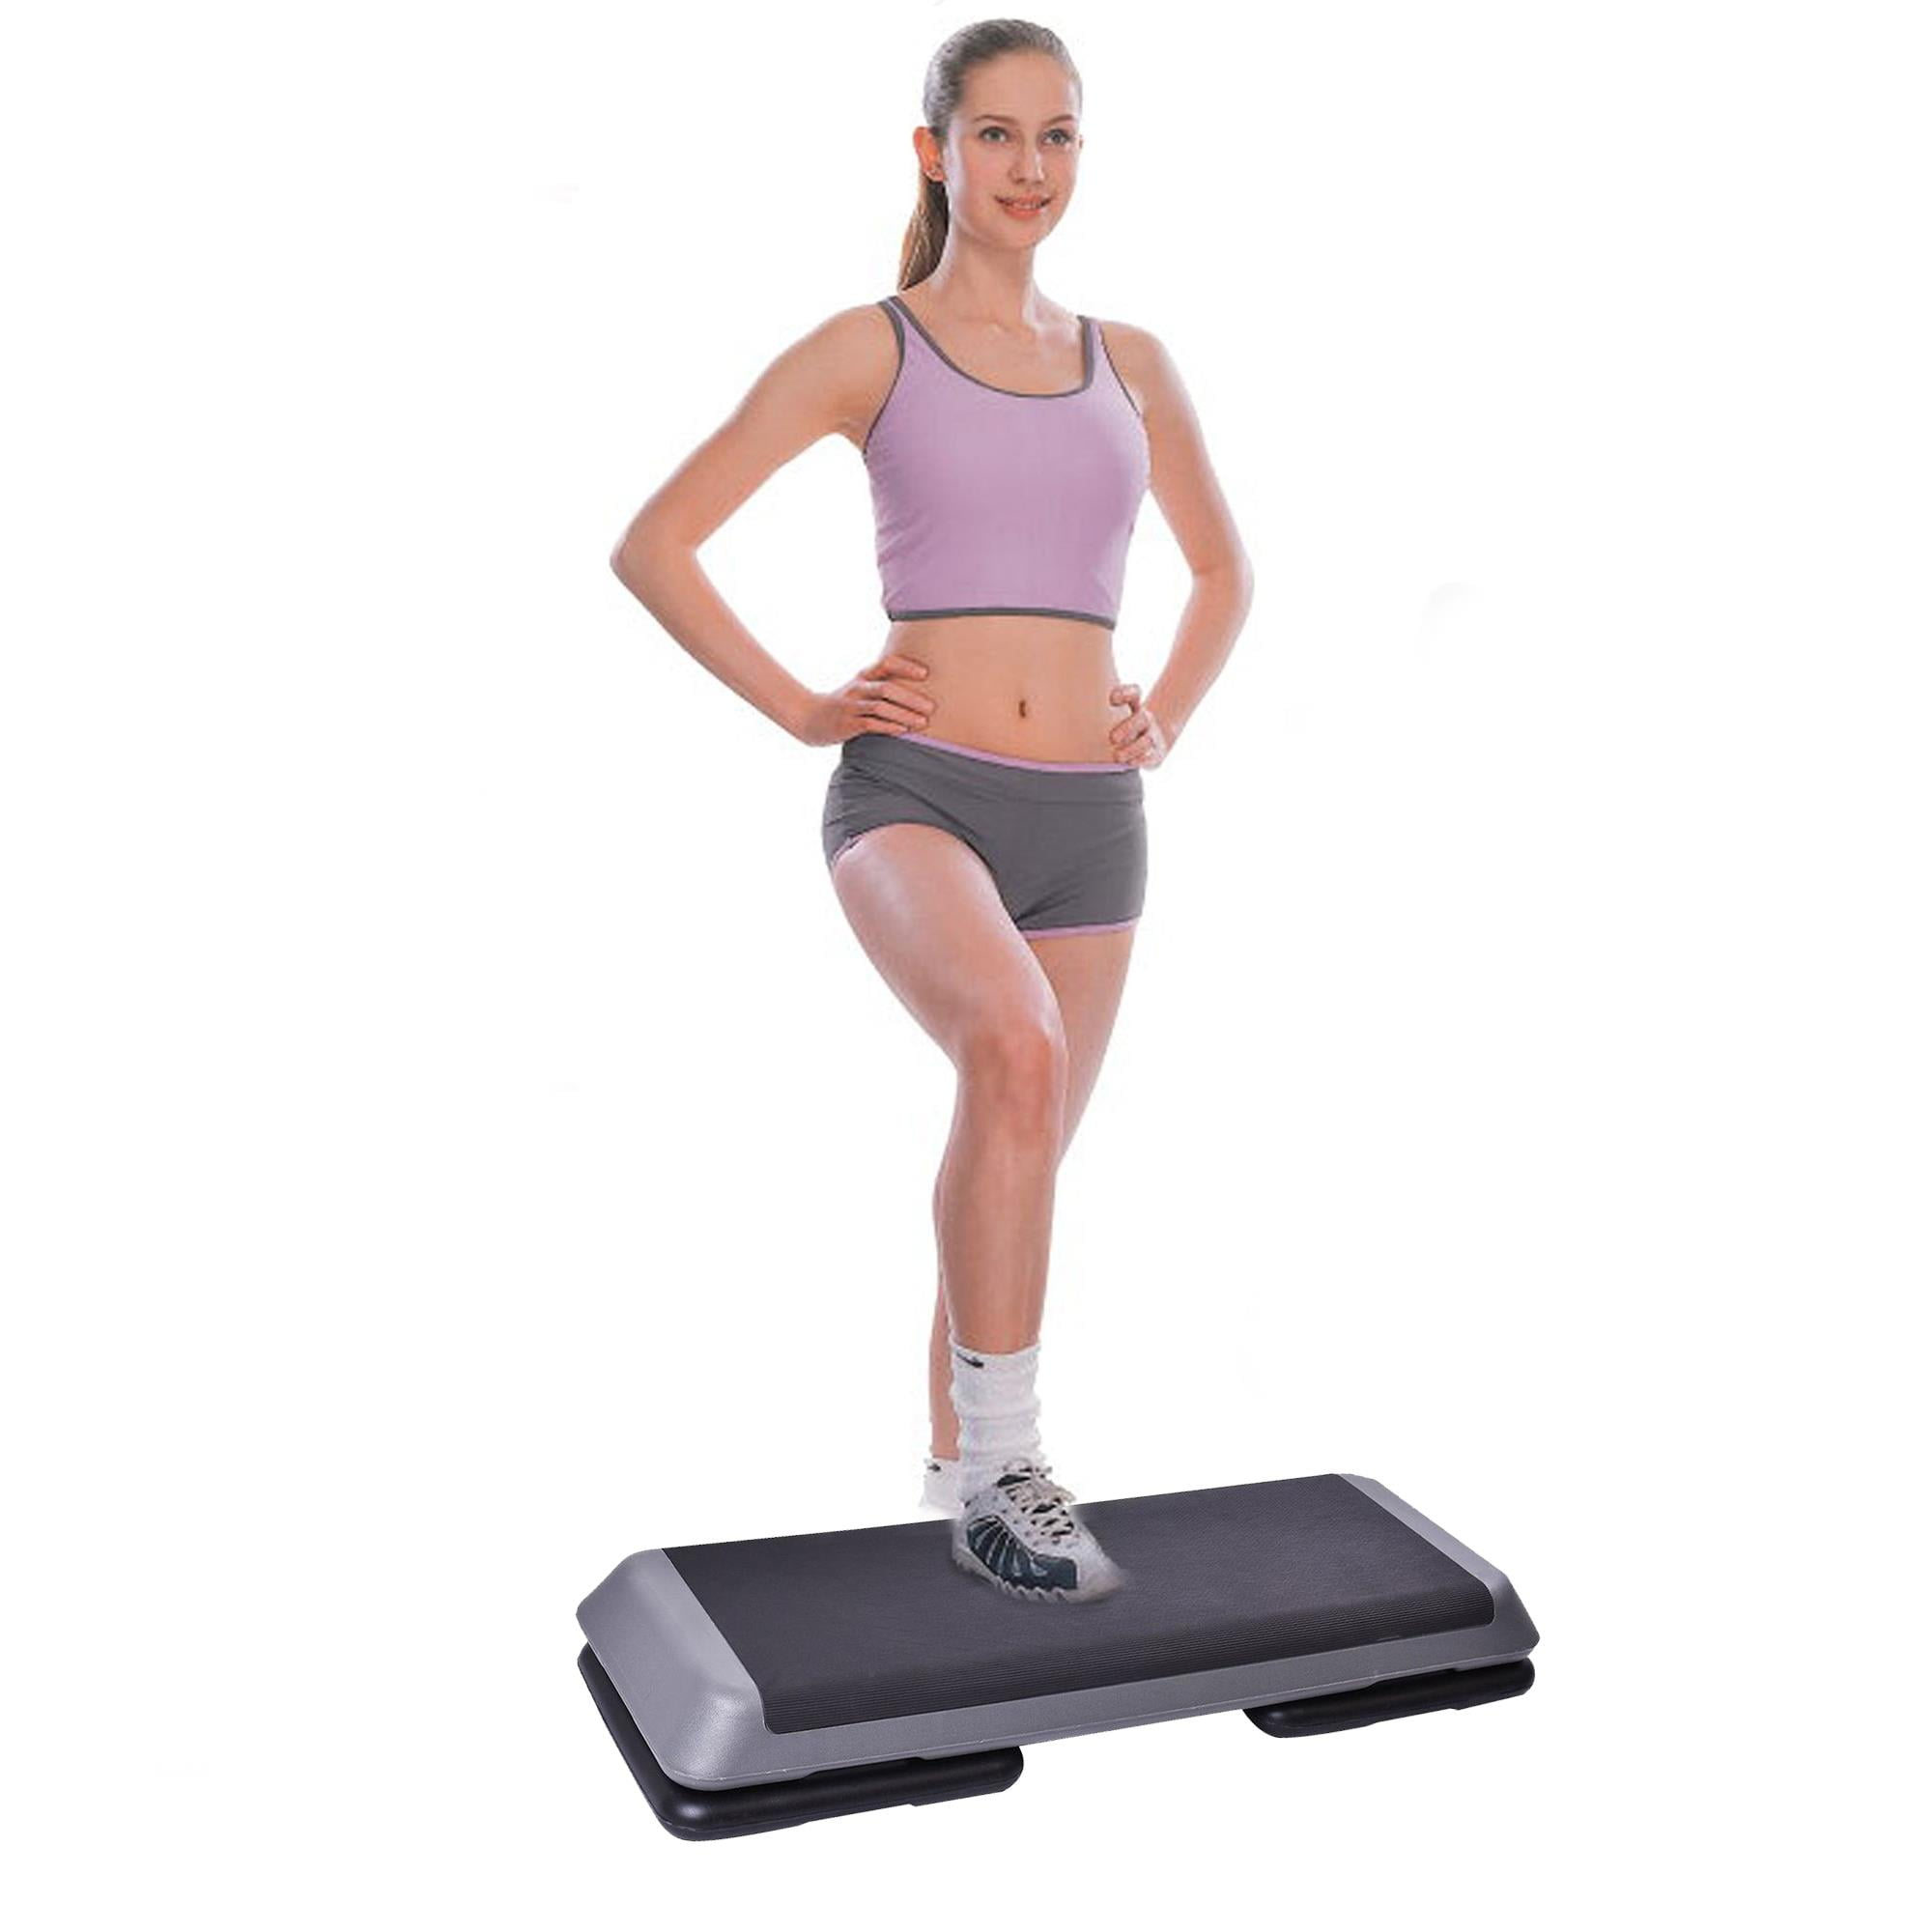 LiveCreative 30'' Fitness Aerobic Step Adjust 4-6 8 Exercise Stepper with Risers Adjustable Aerobic Stepper Workout Exercise Step Platform Riser 3 Levels for Fitness Strength Training 